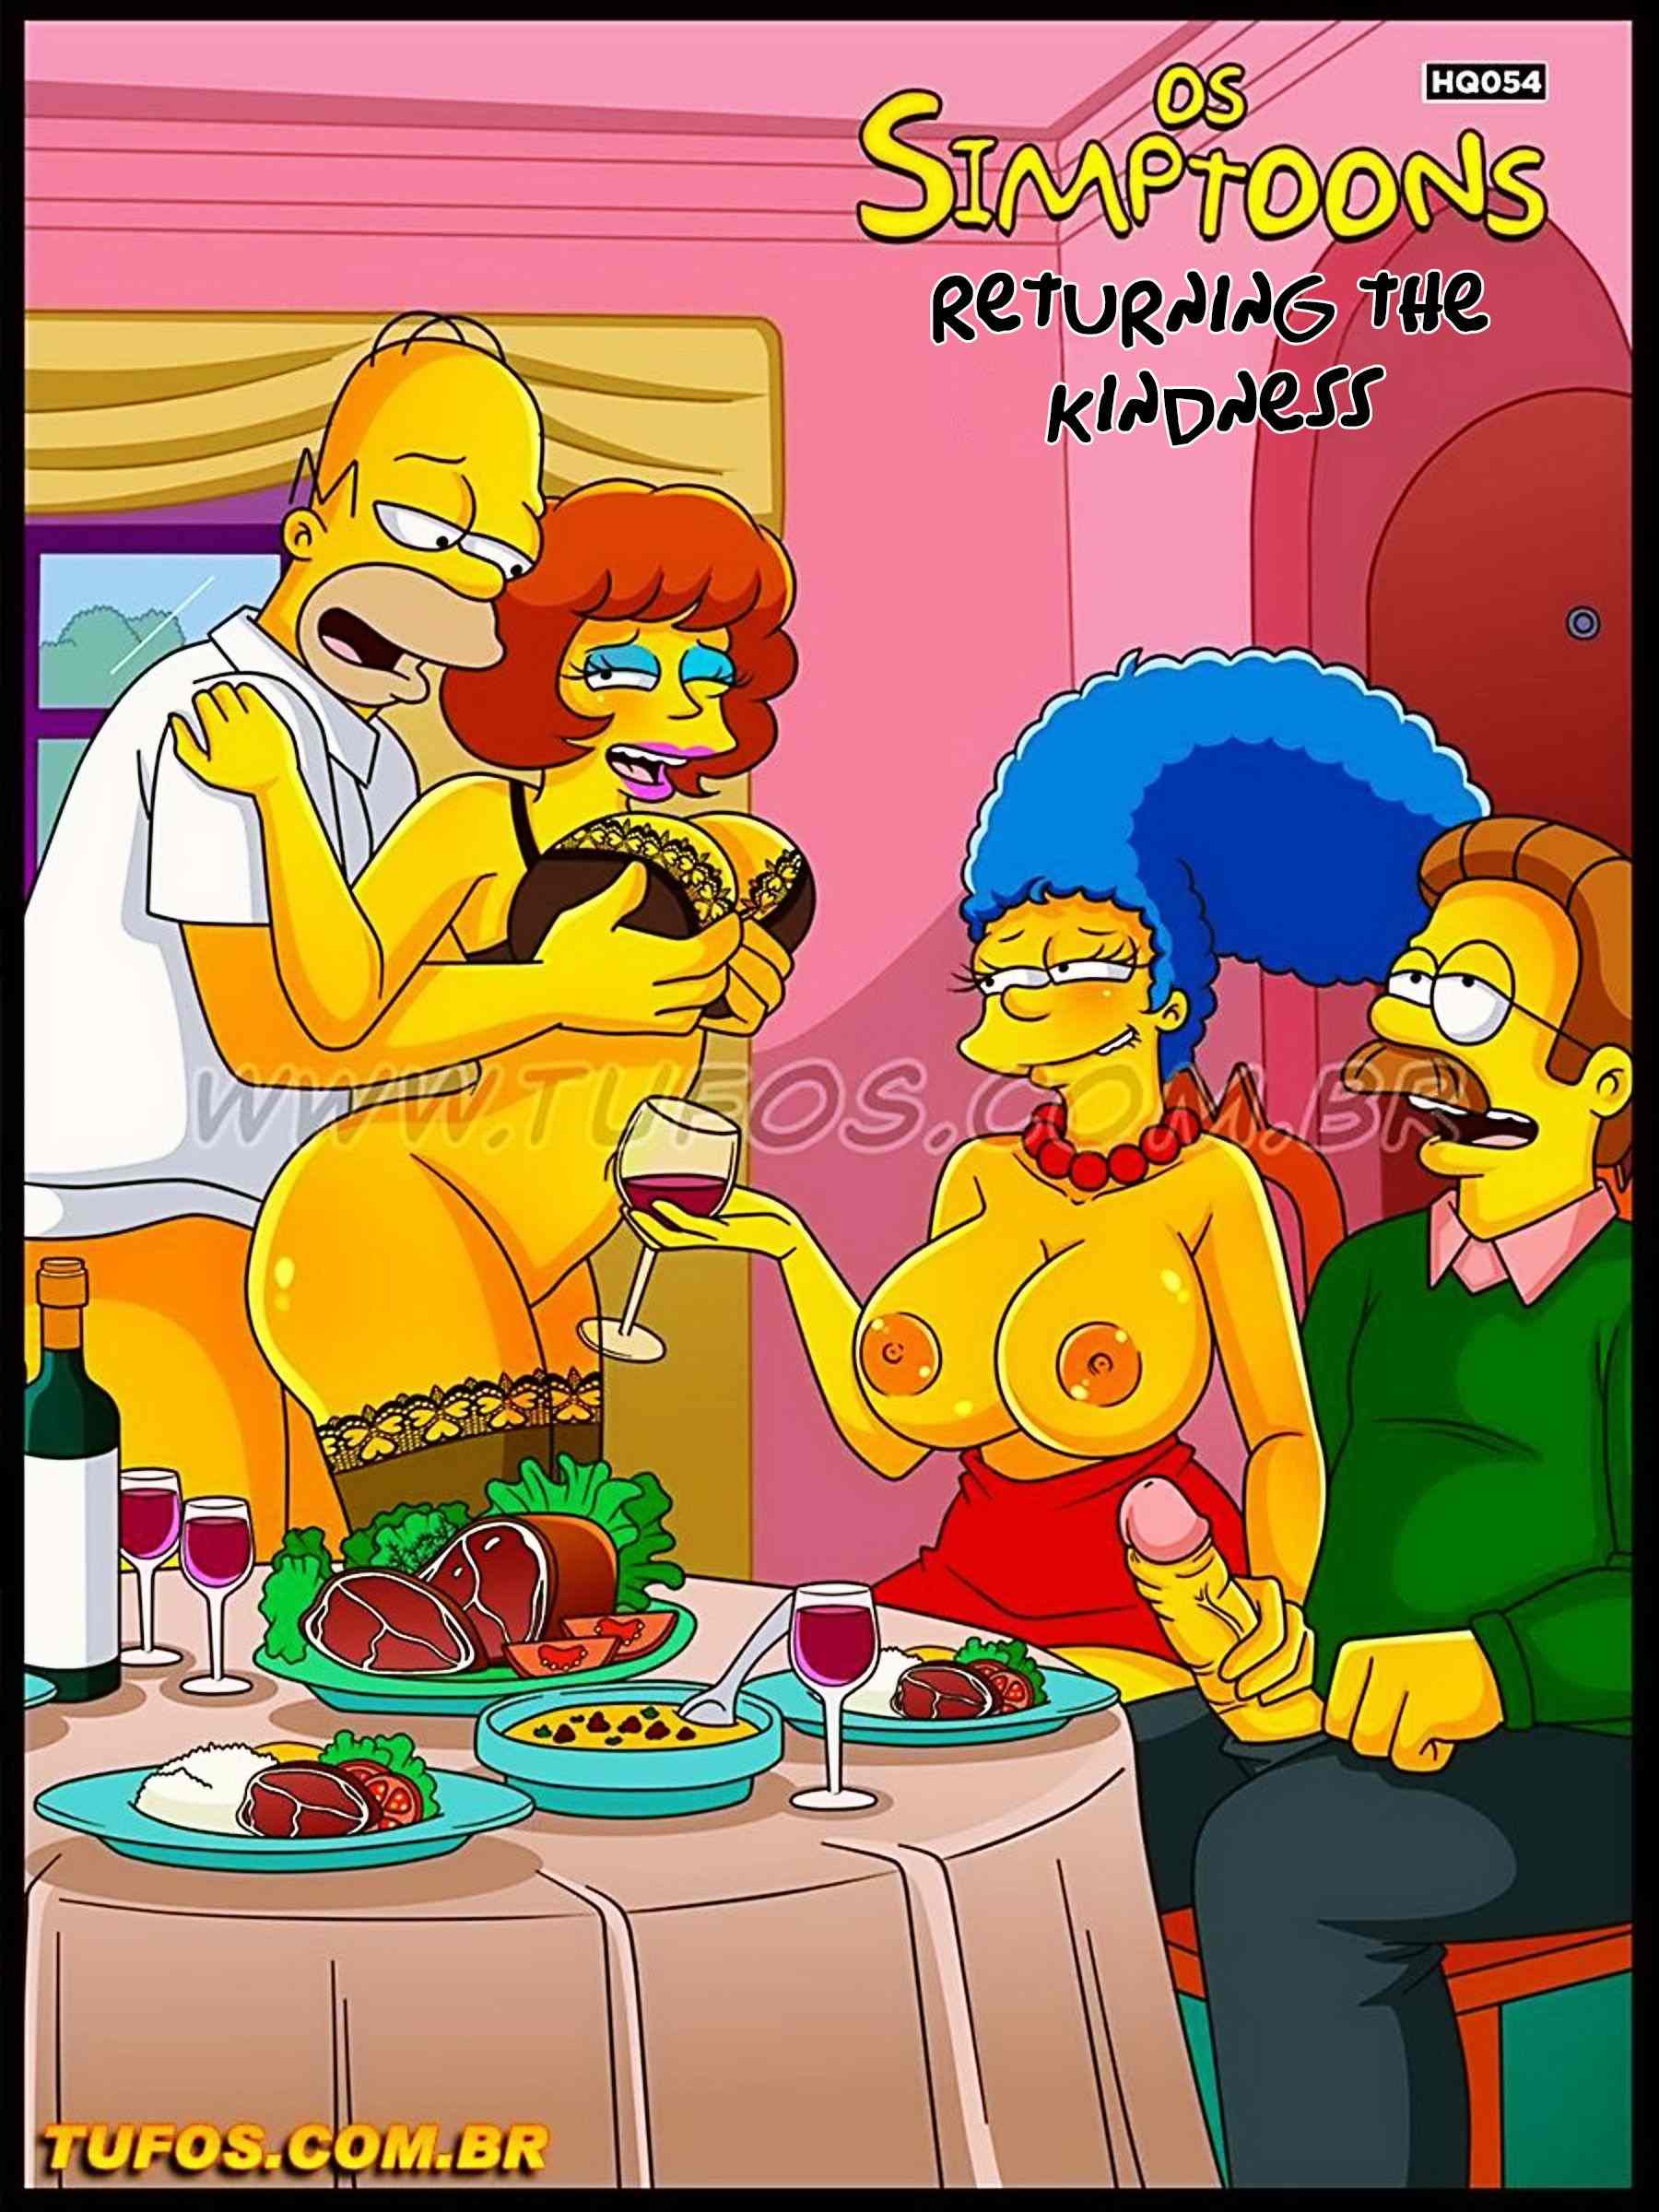 rule34 Maude_Flanders anal sex The Simpsons 54 The Simpsons tufos